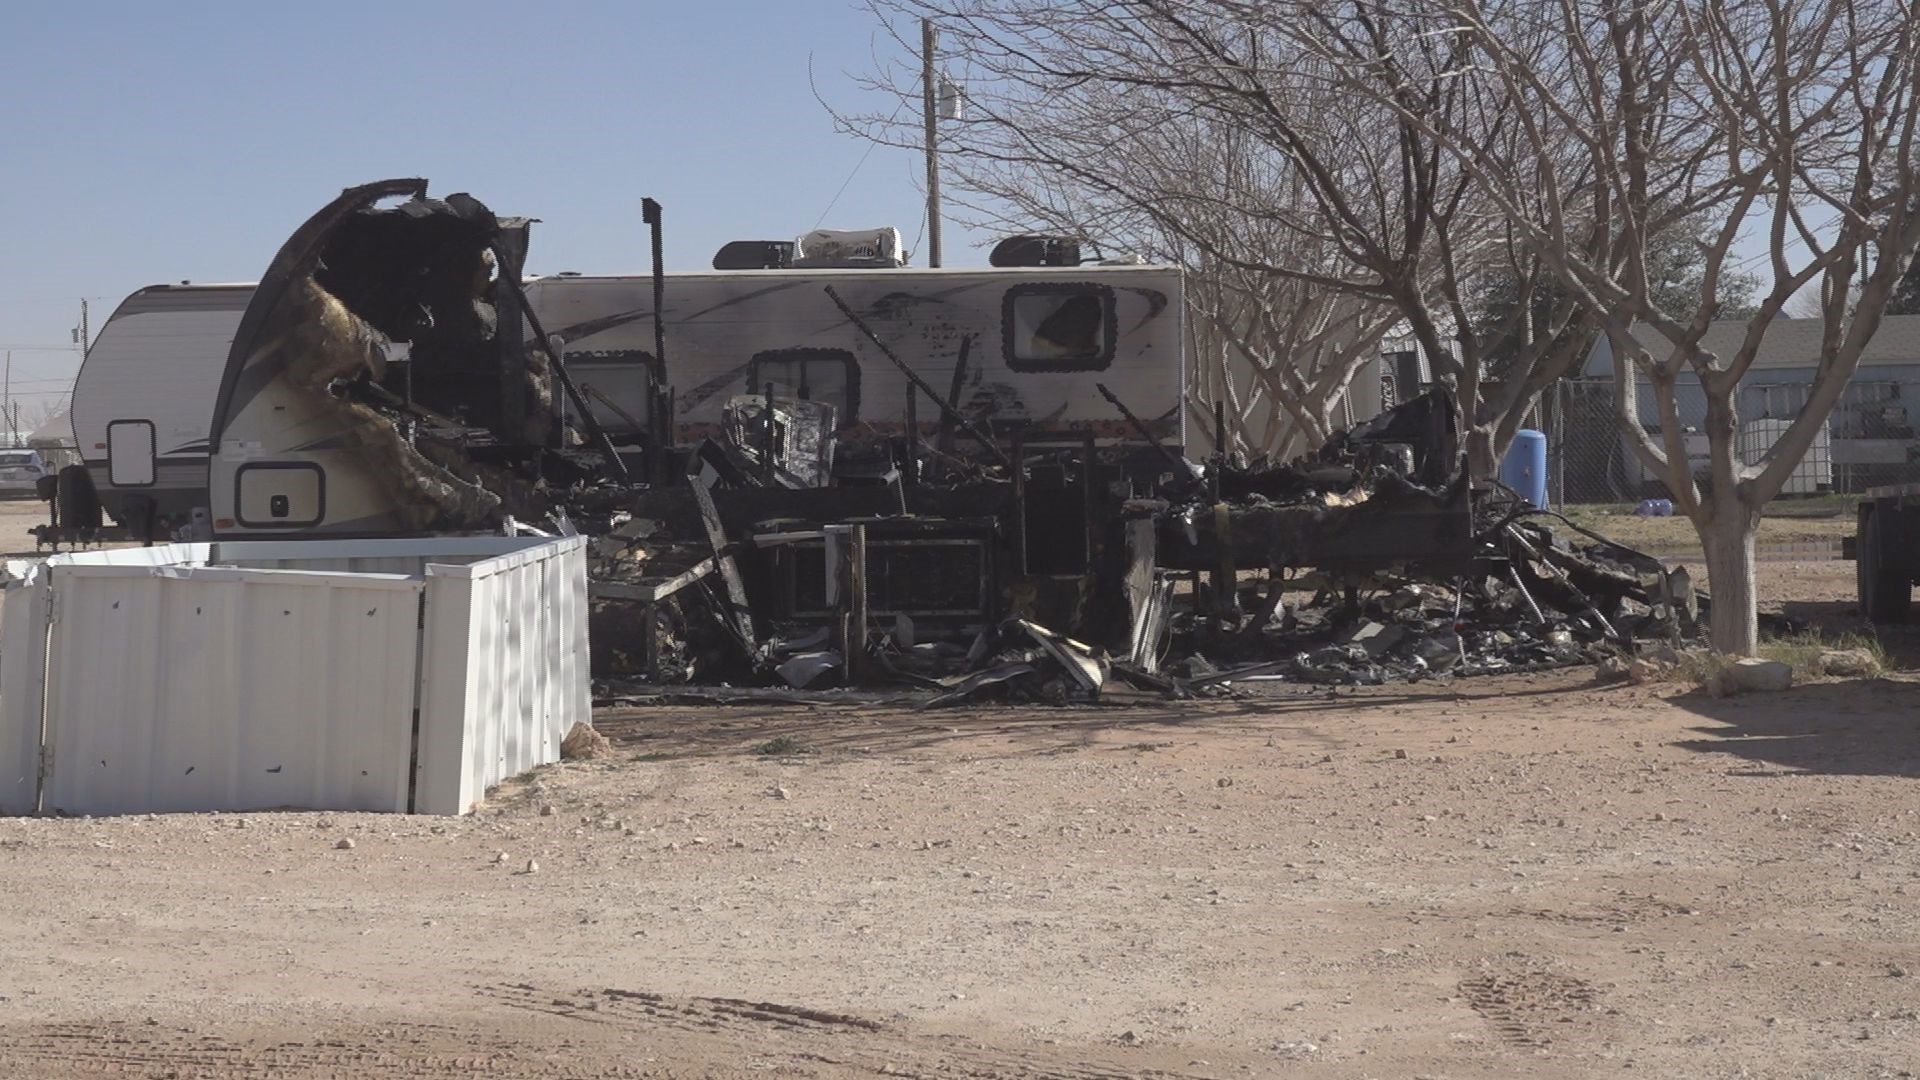 The RV was considered a complete loss once it was put out.